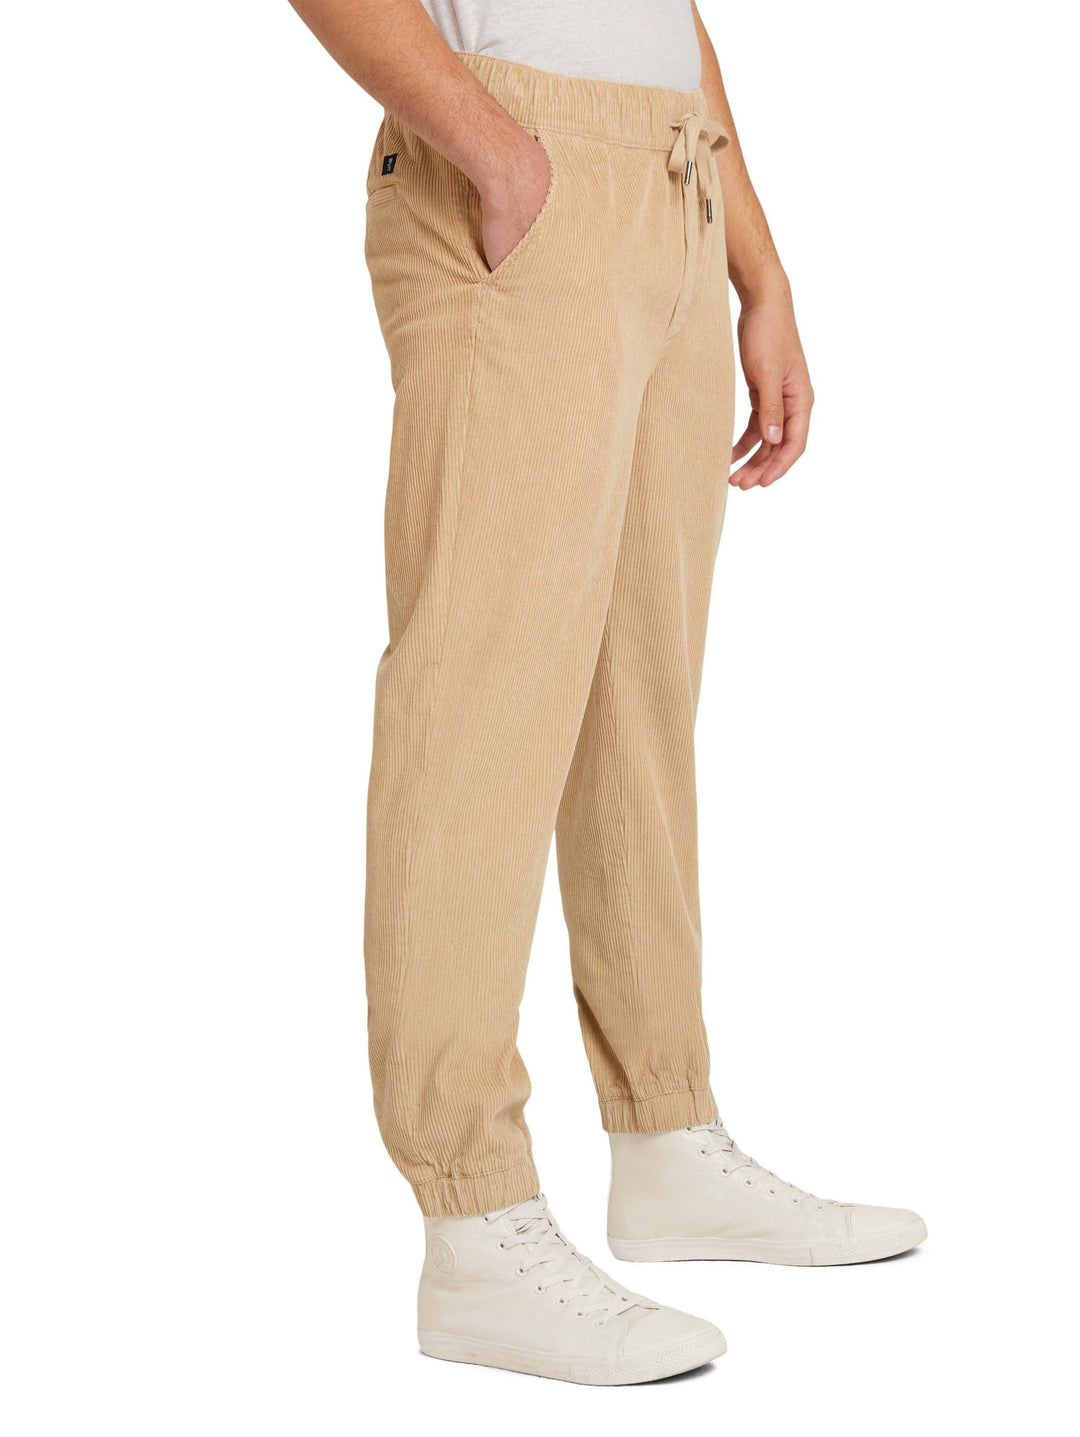 RELAXED CORDUROY JOGGER